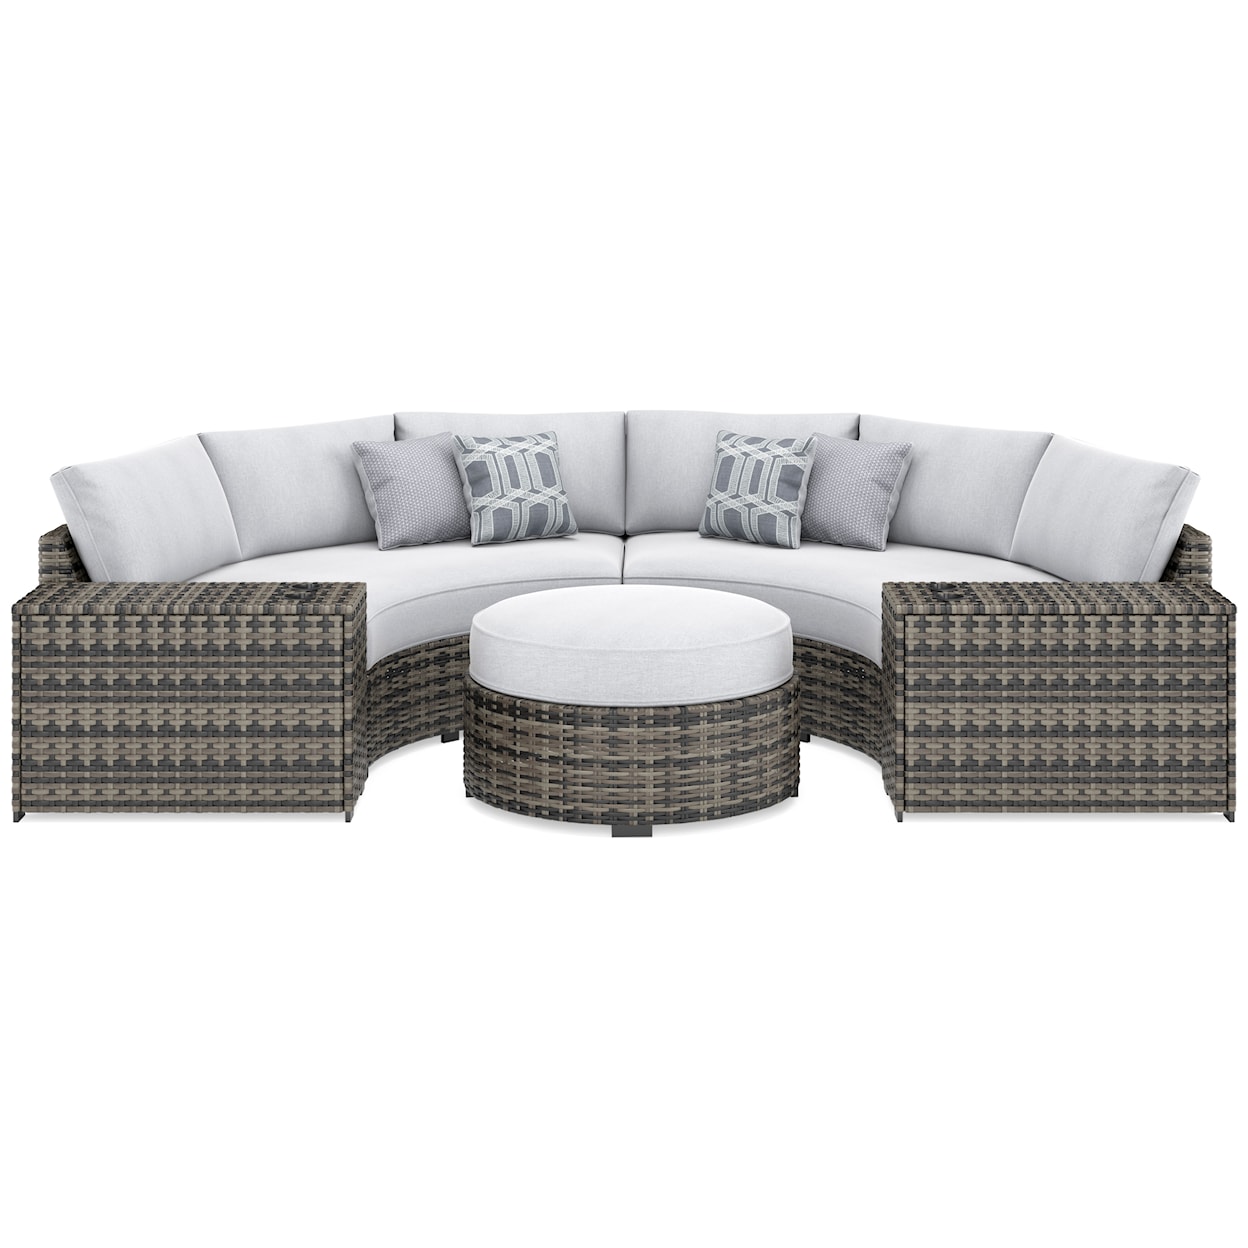 Signature Harbor Court 4-Piece Outdoor Sectional